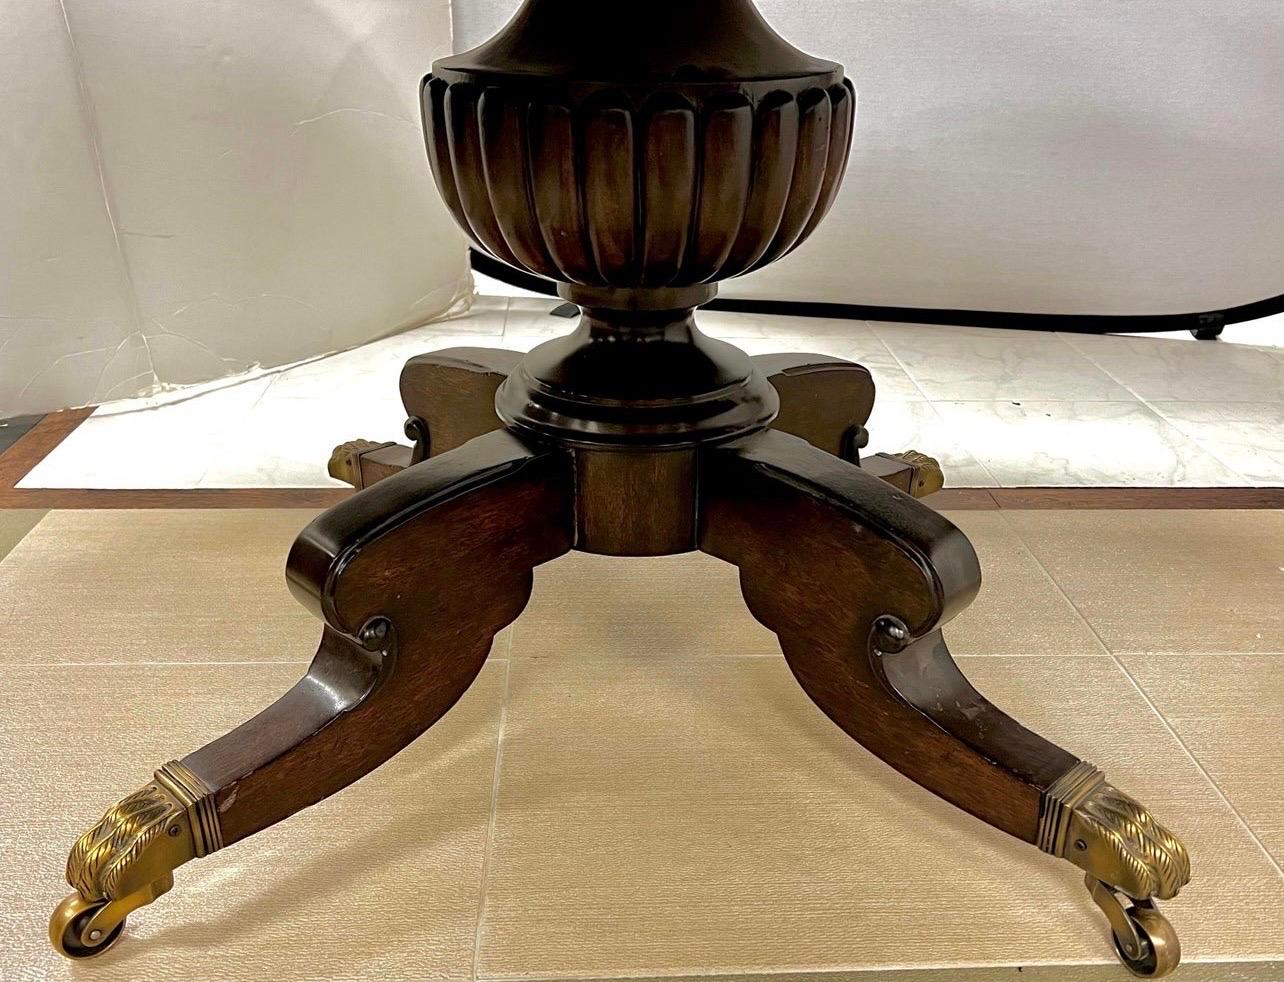 Gorgeous Ralph Lauren/Henredon round wooden dining table with six matching saddle leather chairs with cane backs.  All in great condition.
The table is 60 inches round and there are no leaves so can sit six to eight comfortably.  The pedestal table